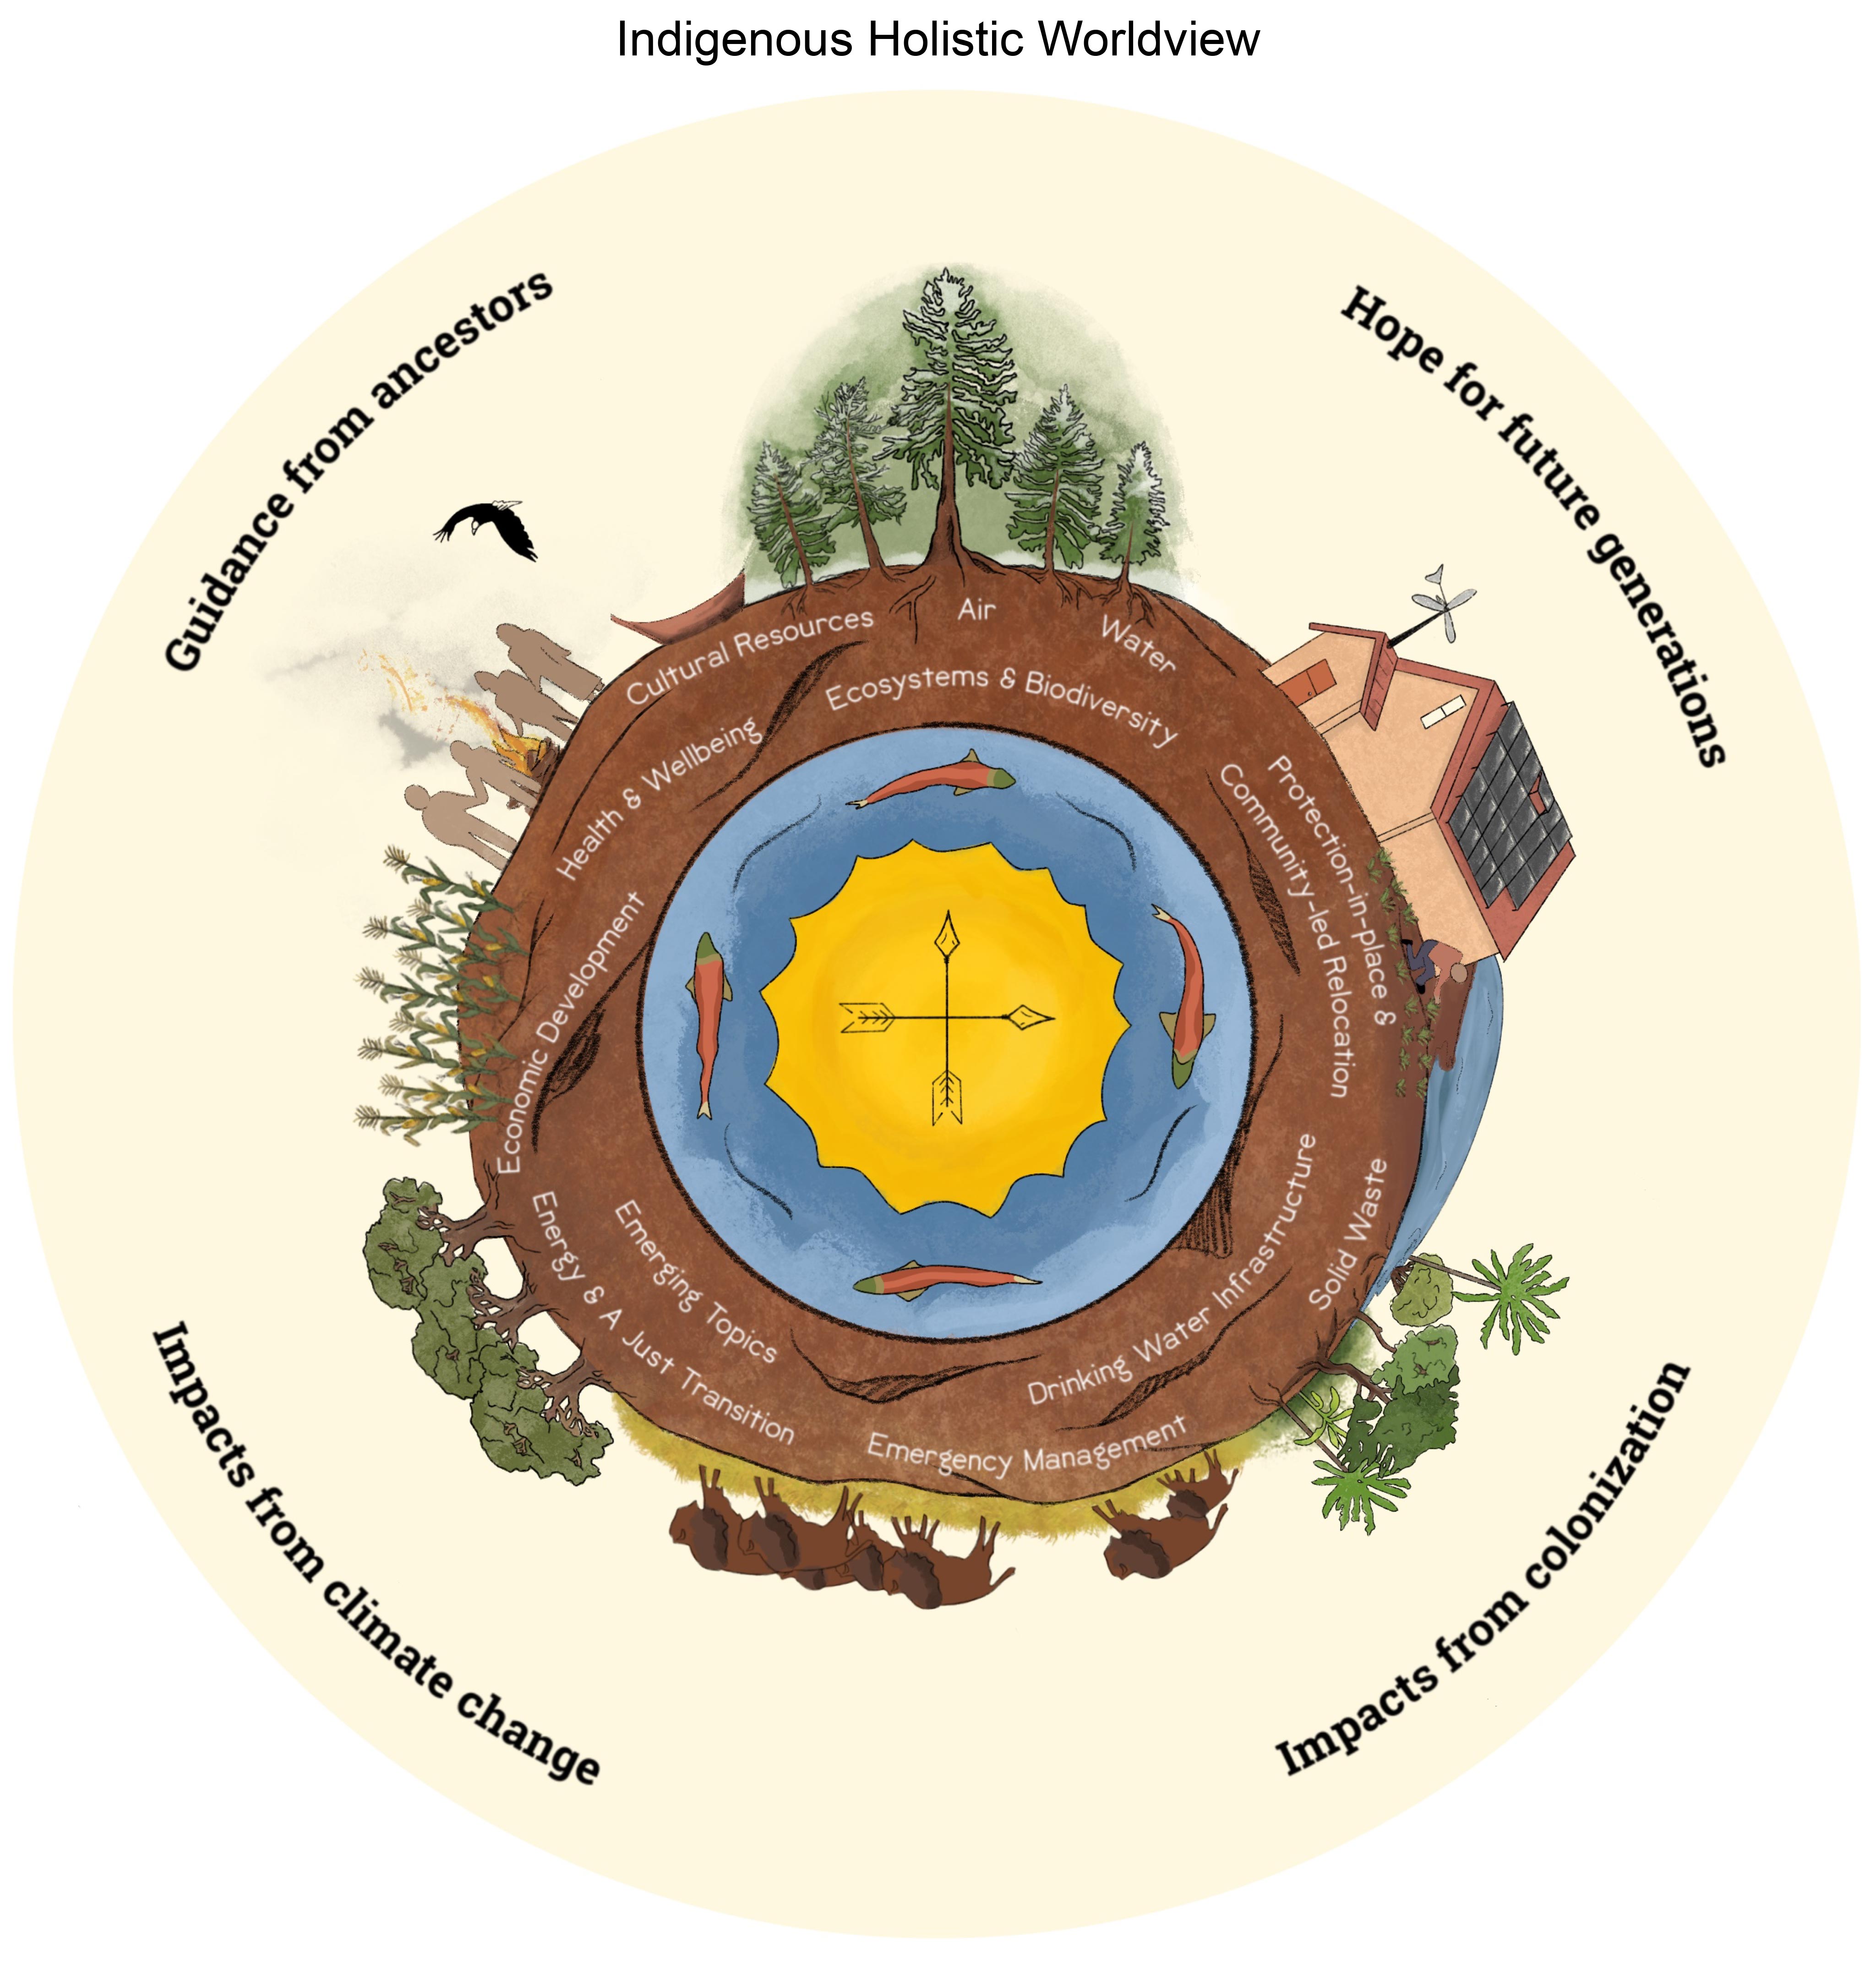 Indigenous Holistic Worldview